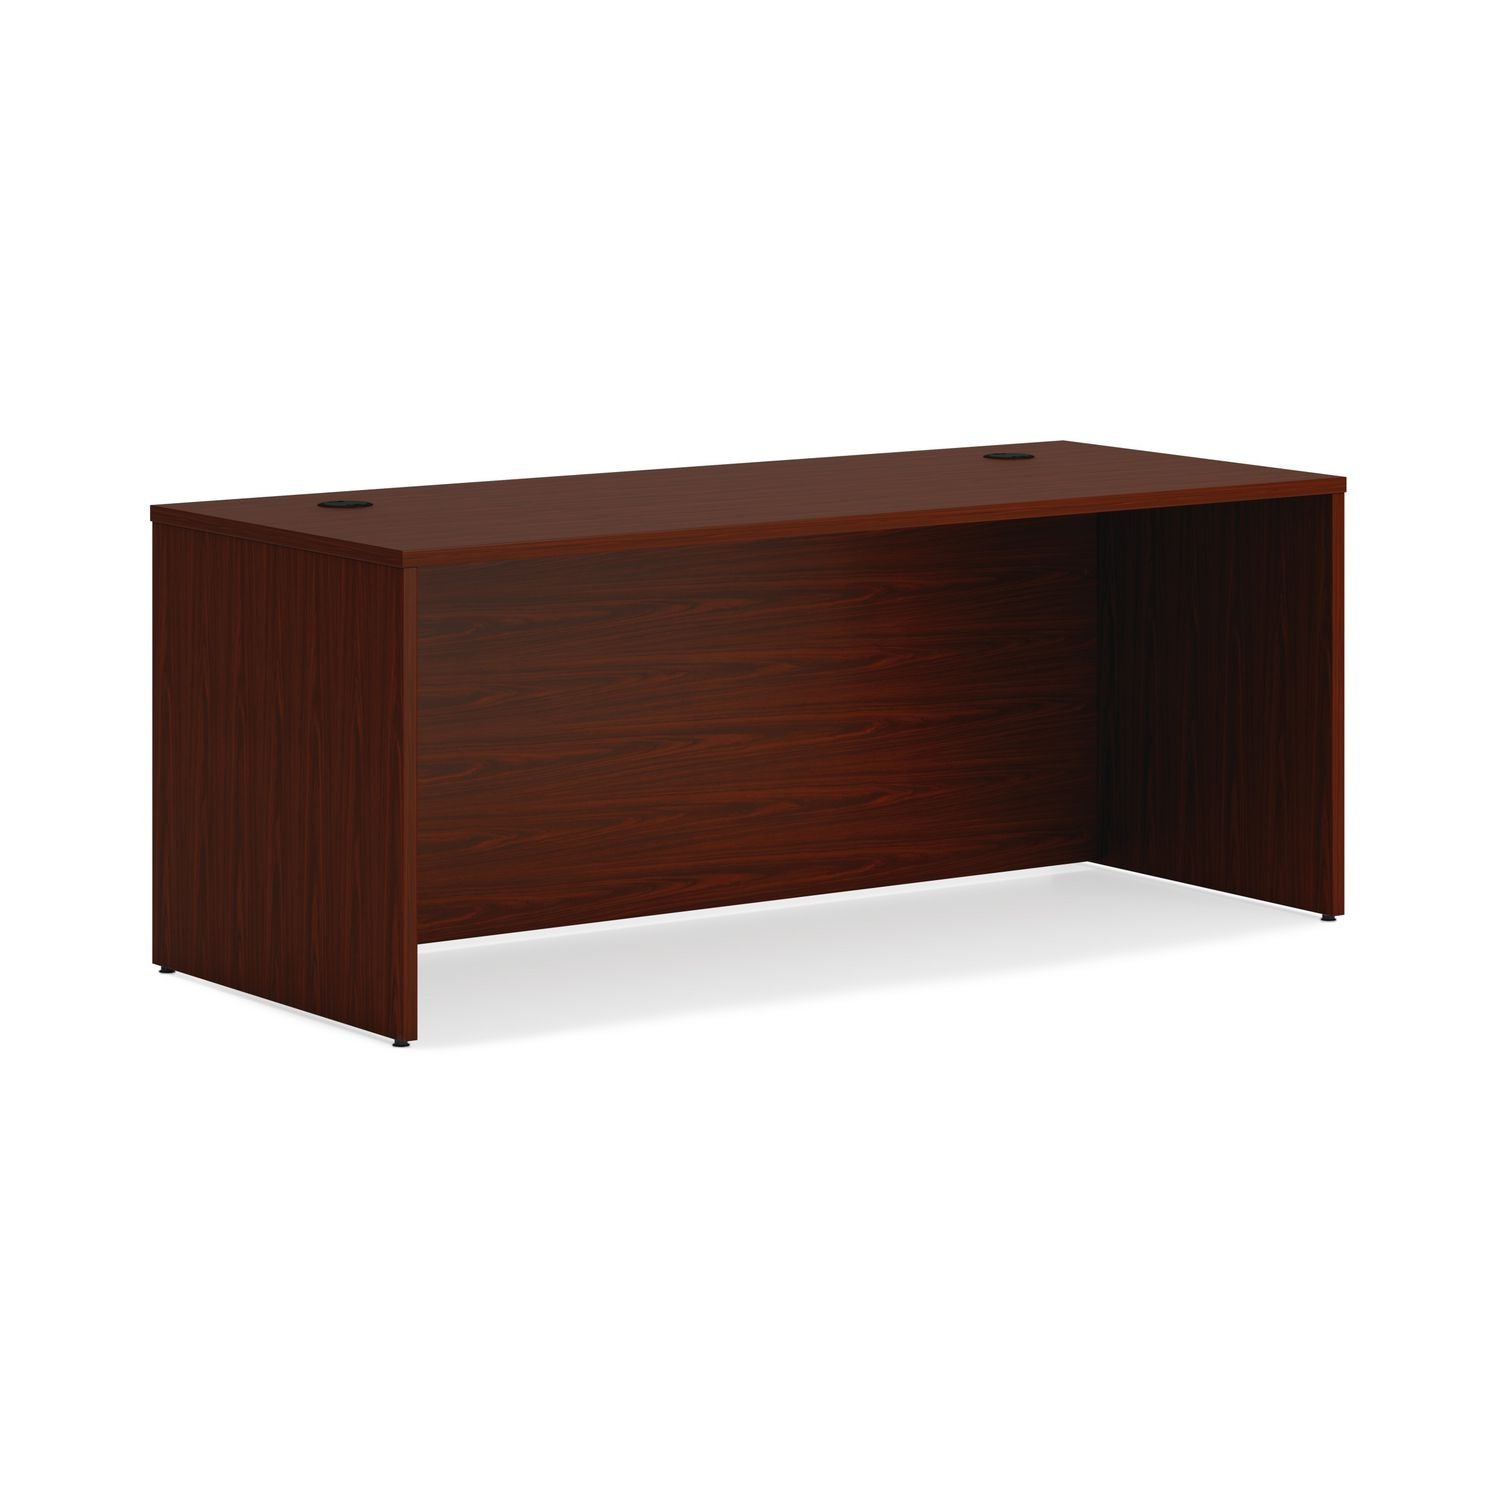 mod-double-pedestal-desk-bundle-72-x-30-x-29-traditional-mahogany-ships-in-7-10-business-days_honmod006 - 2